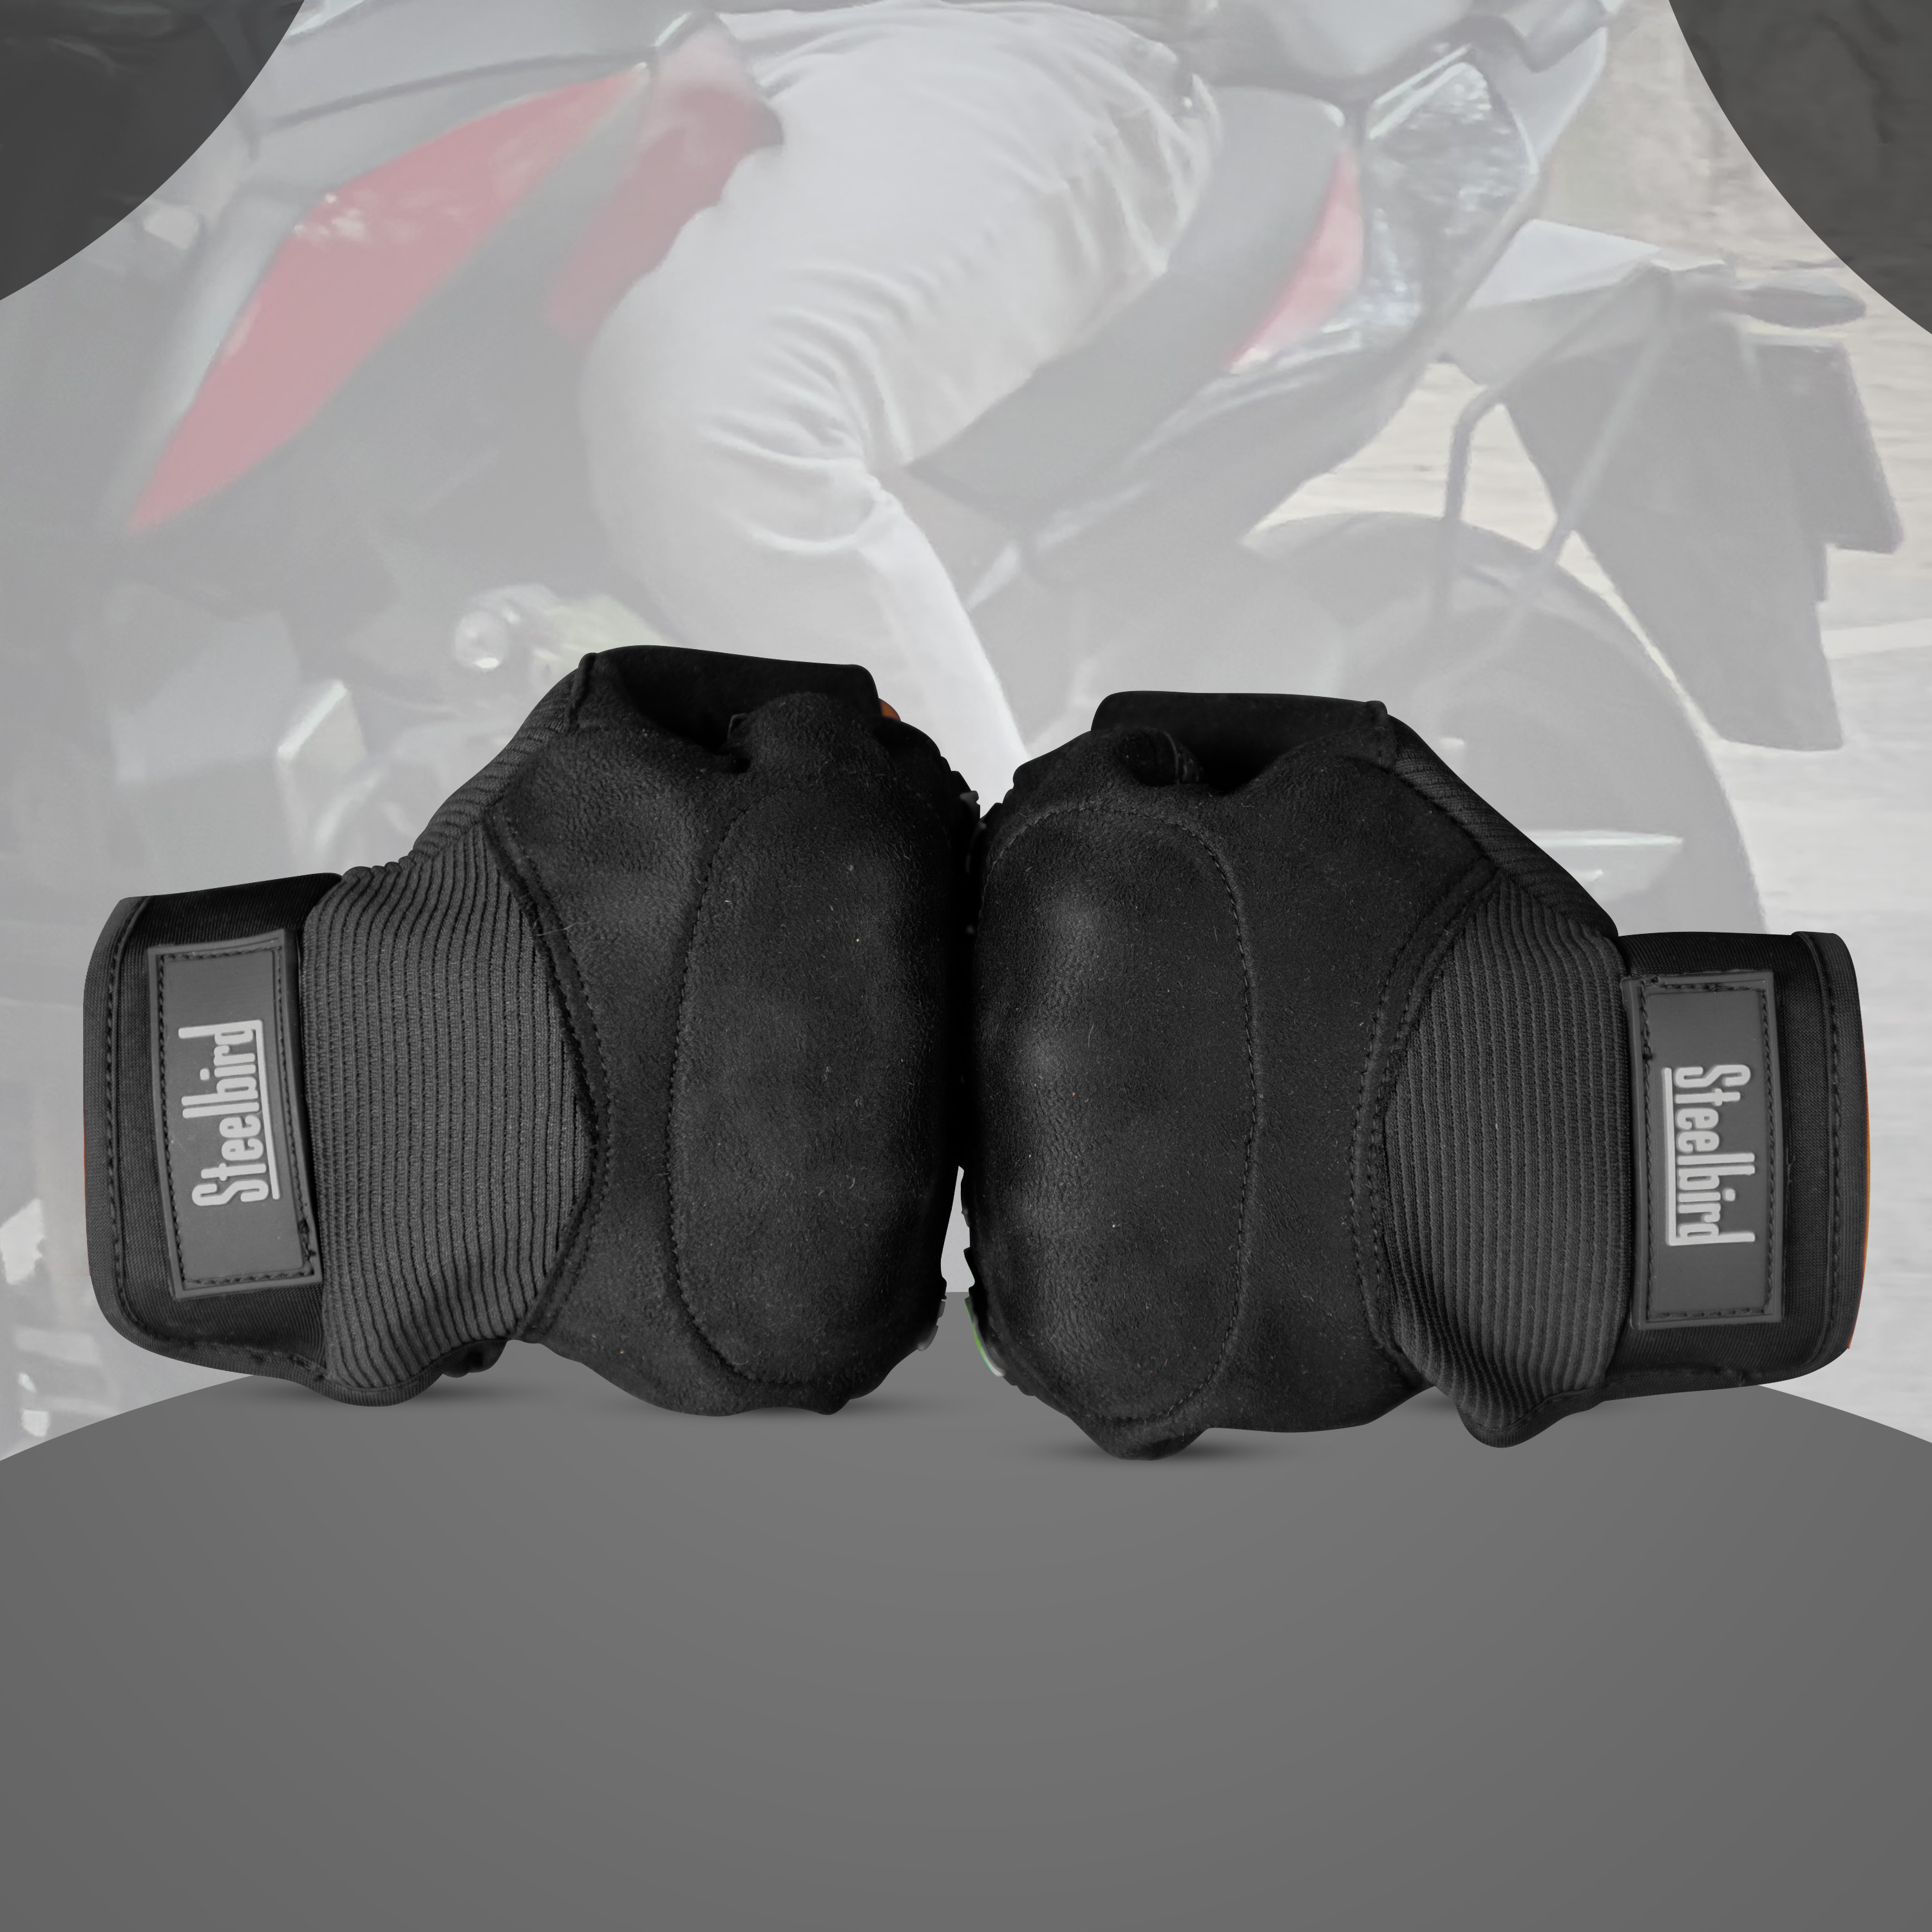 Steelbird Experience 1.0 Reflective Half Finger Bike Riding Gloves With Touch Screen Sensitivity At Thumb And Index Finger, Protective Off-Road Motorbike Racing (Black)